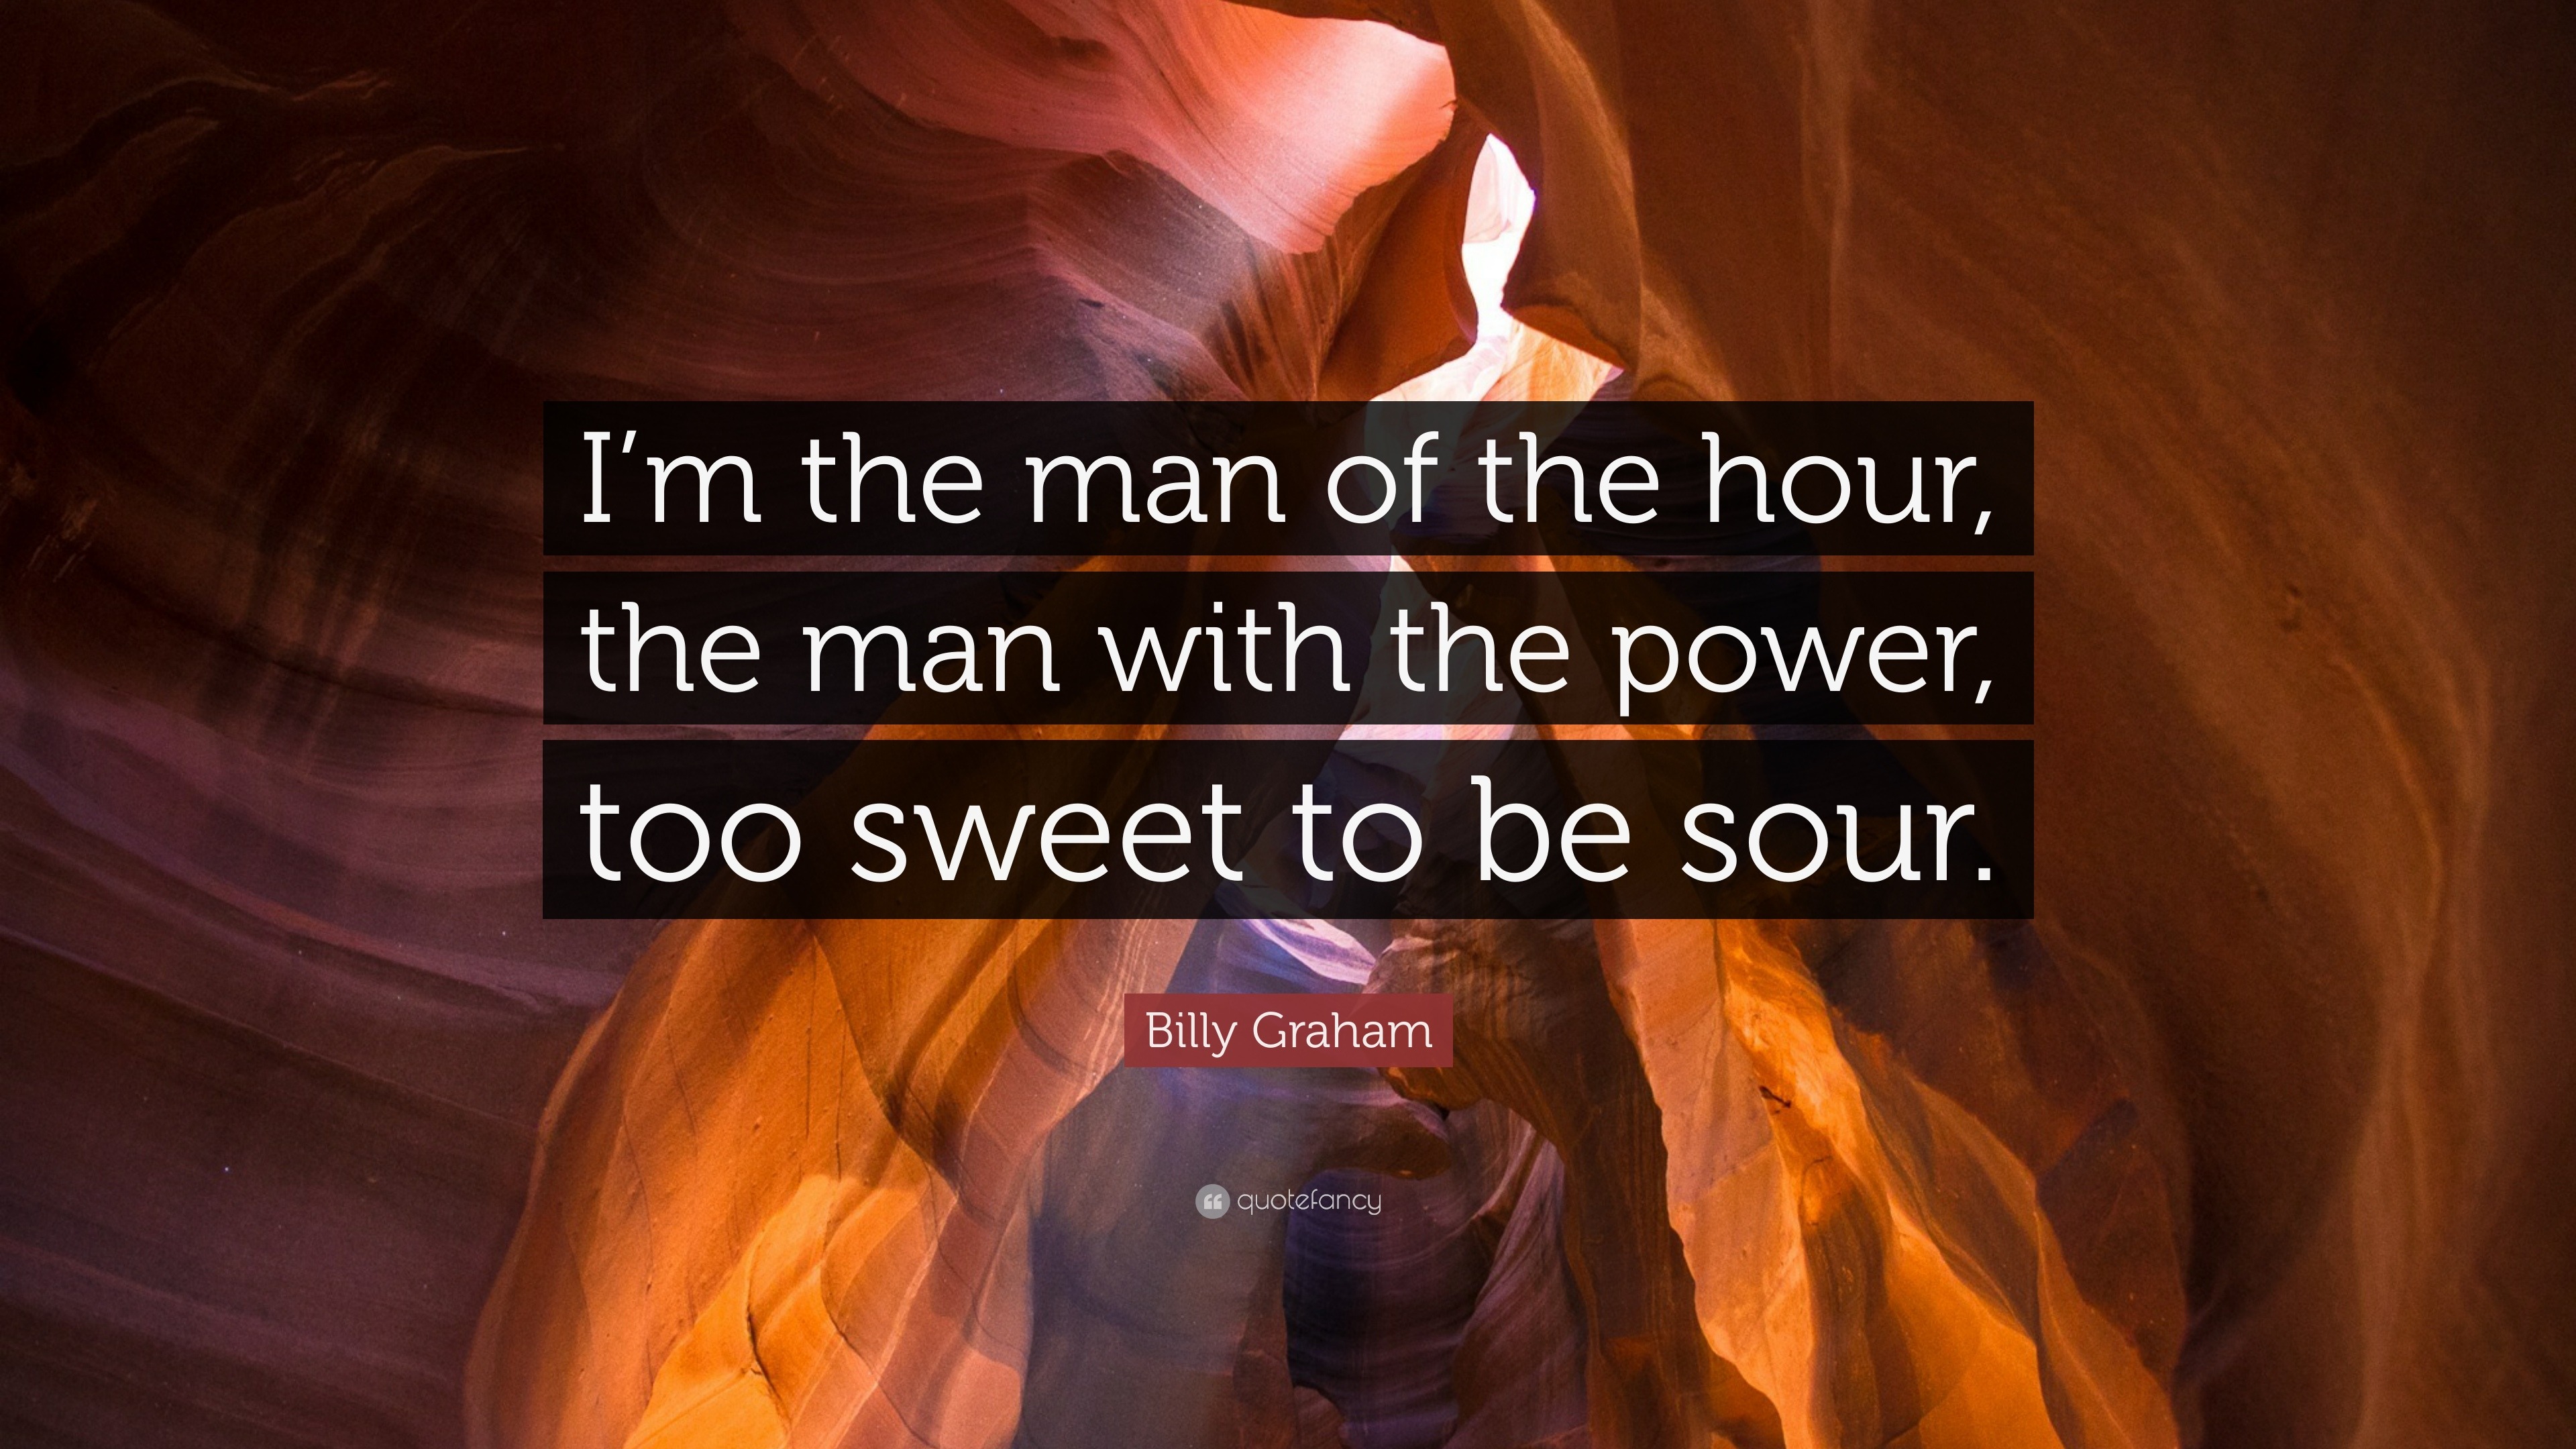 https://quotefancy.com/media/wallpaper/3840x2160/1664087-Billy-Graham-Quote-I-m-the-man-of-the-hour-the-man-with-the-power.jpg